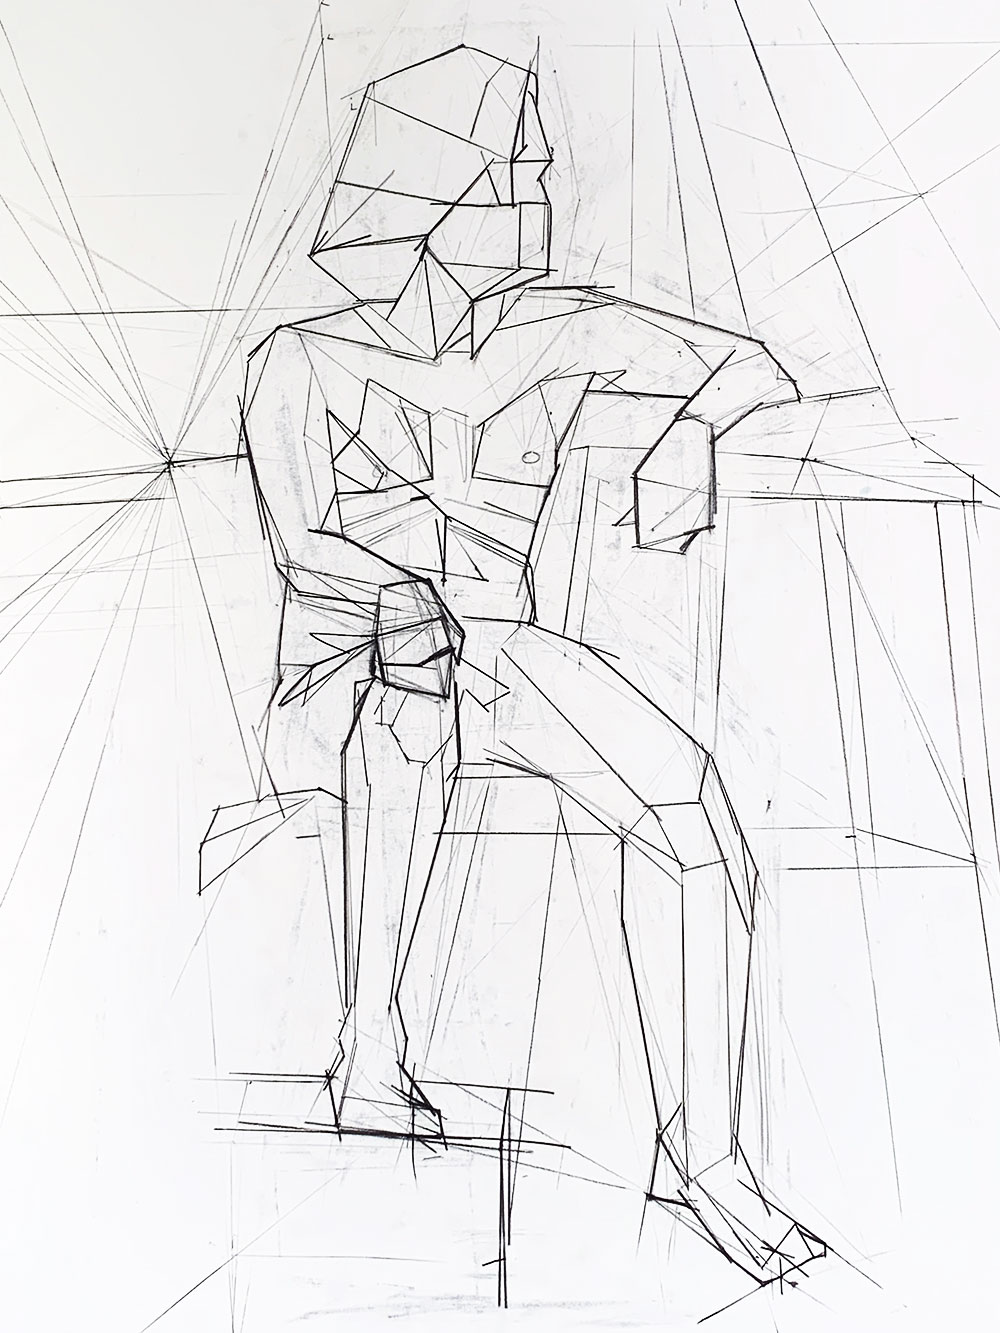 A self portrait composed of several lines, outlining the gesture figure of a human- including angles, proportions, and spatial relationships, drawn in vine charcoal.